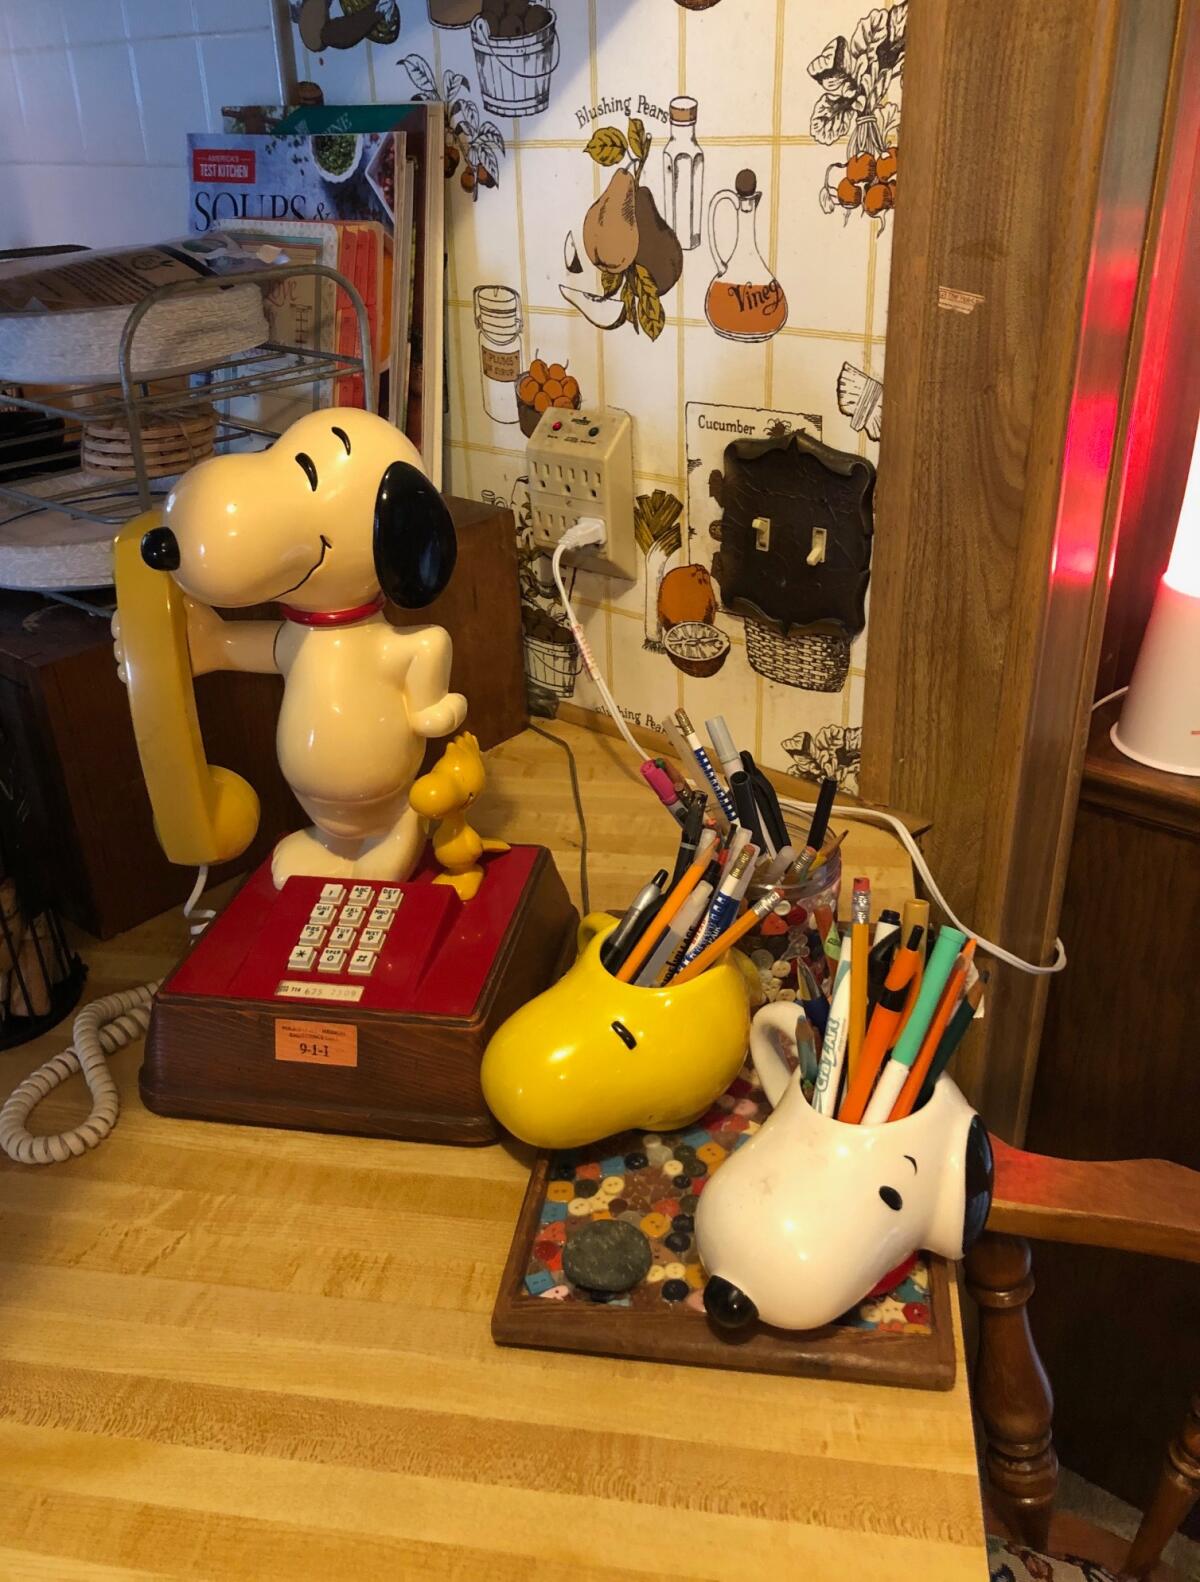 A Snoopy phone is part of Bob Zink's collection. Family members at his beach cottage answered calls with "Hello ... Snoopy's house."